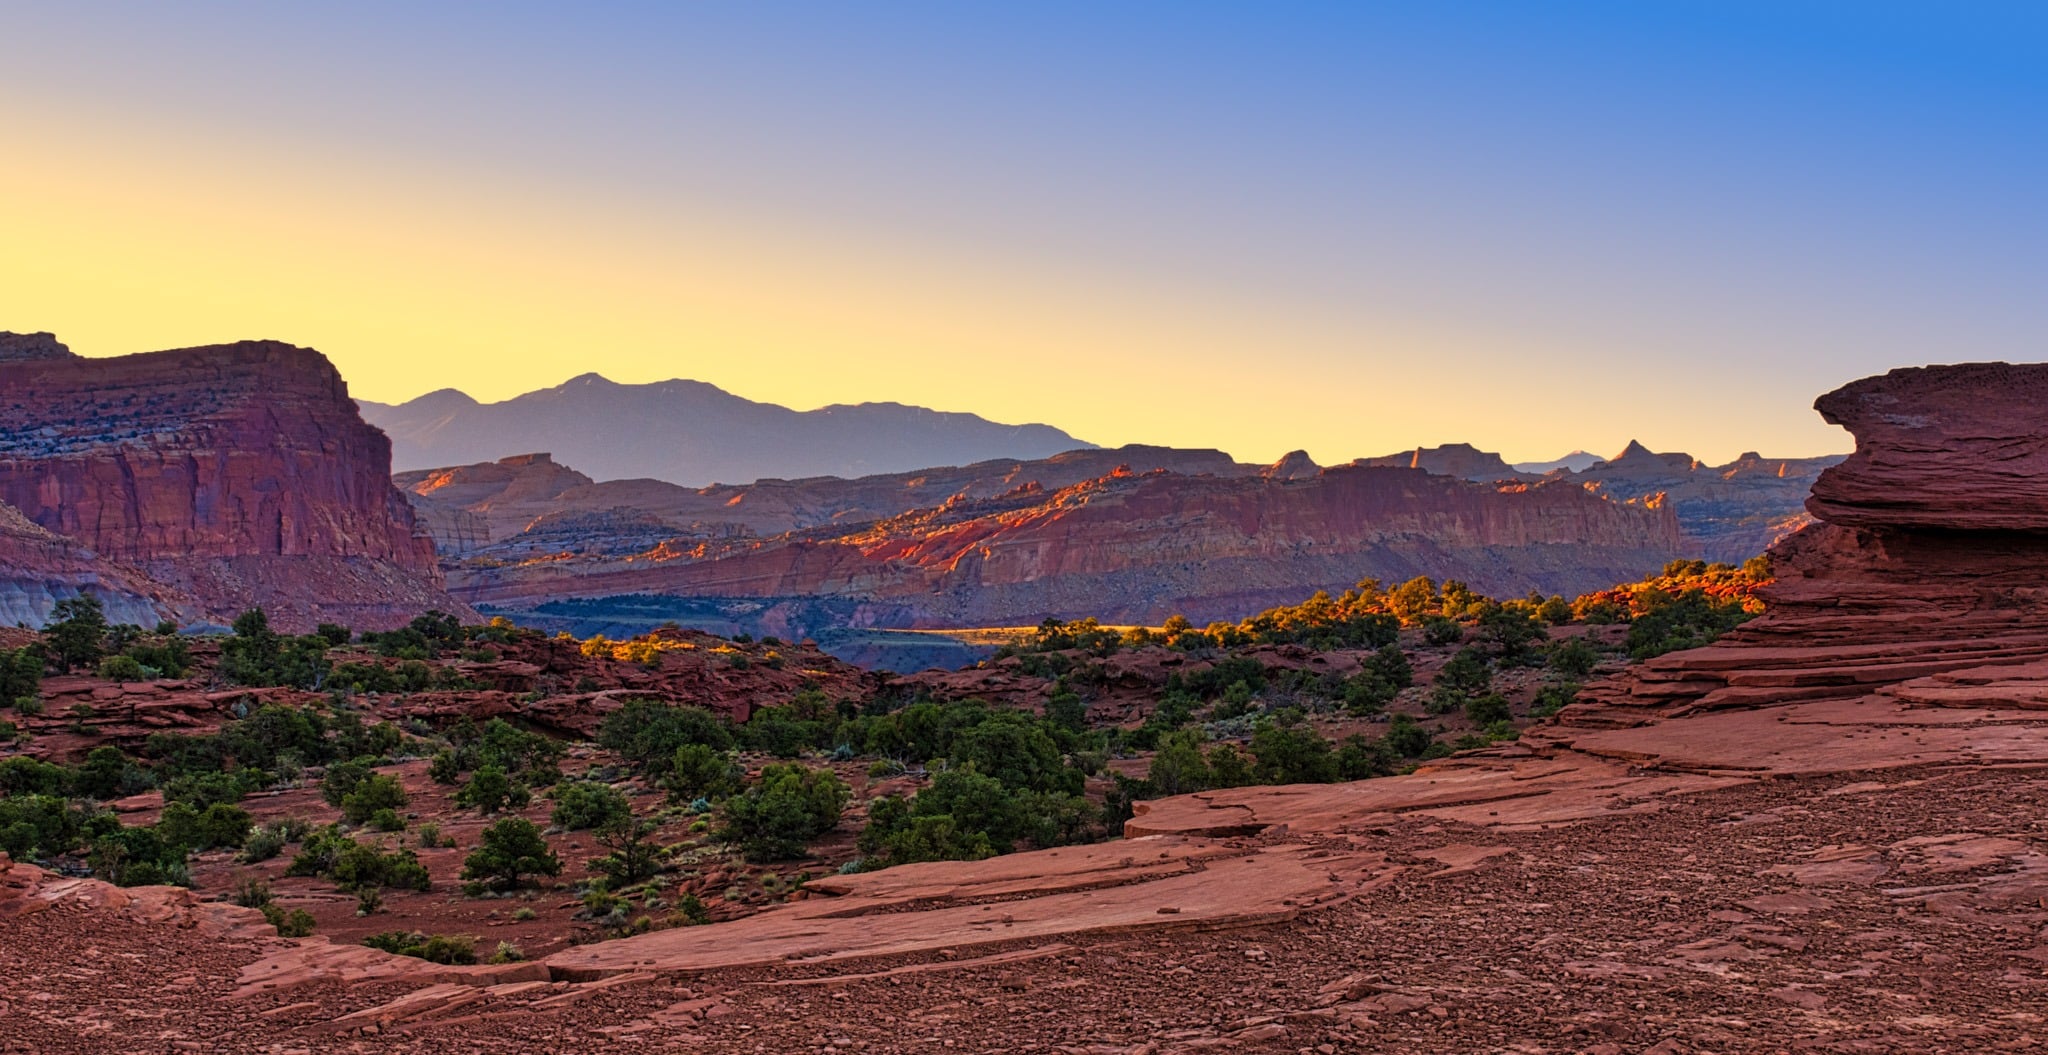 A view looking north toward Mummy Cliffs at sunrise, near Panorama Point in Capitol Reef National Park, Utah.